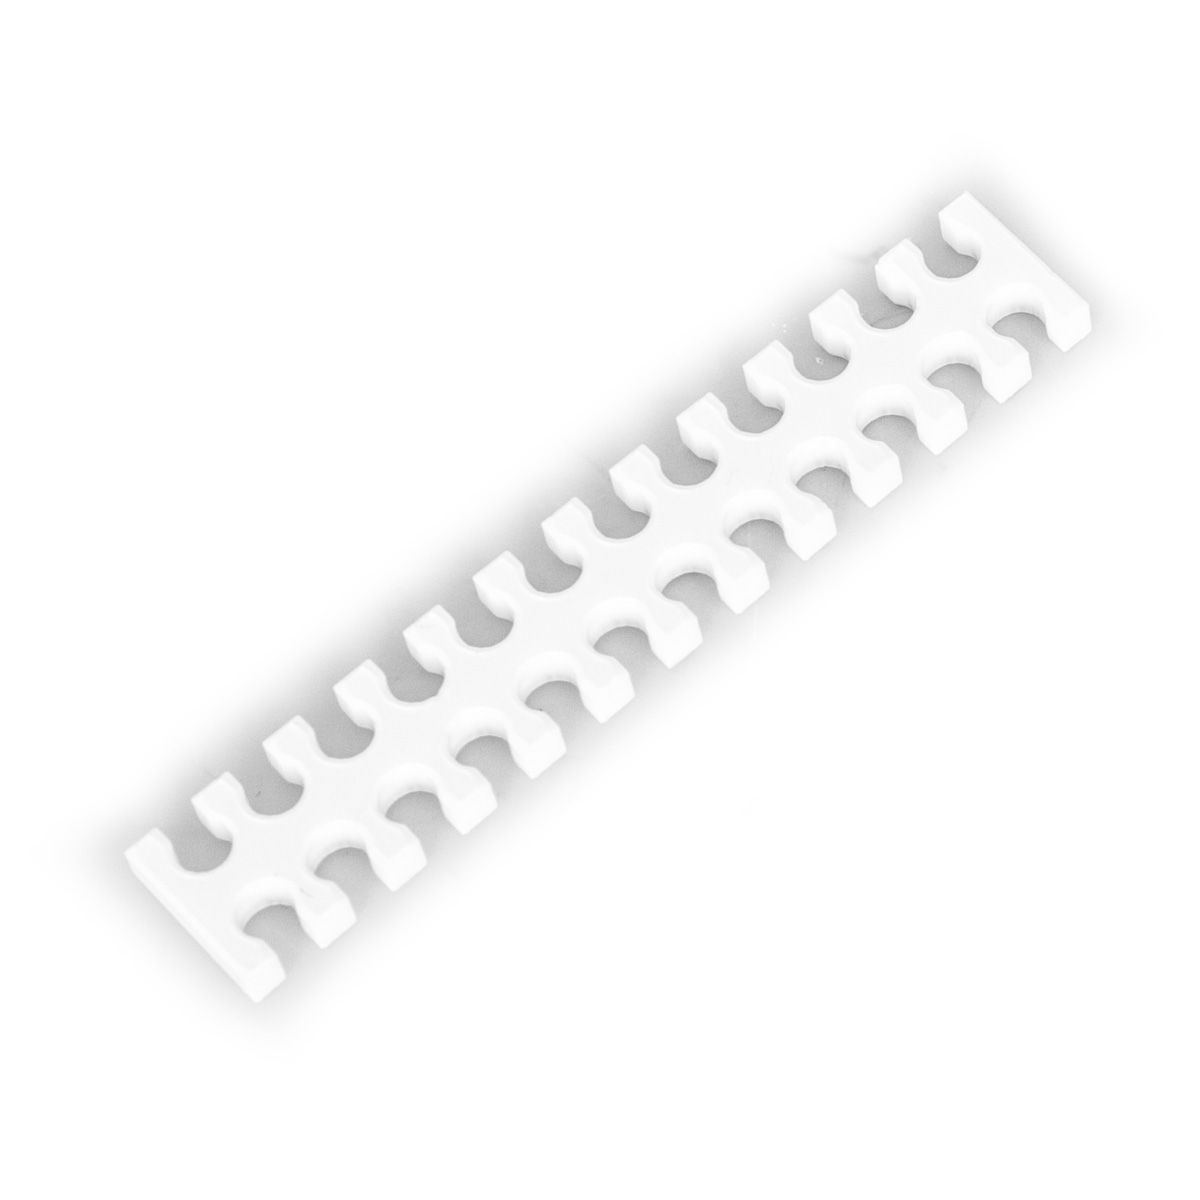 TechForge 24 Slot Cable Comb (Large) 4mm - White